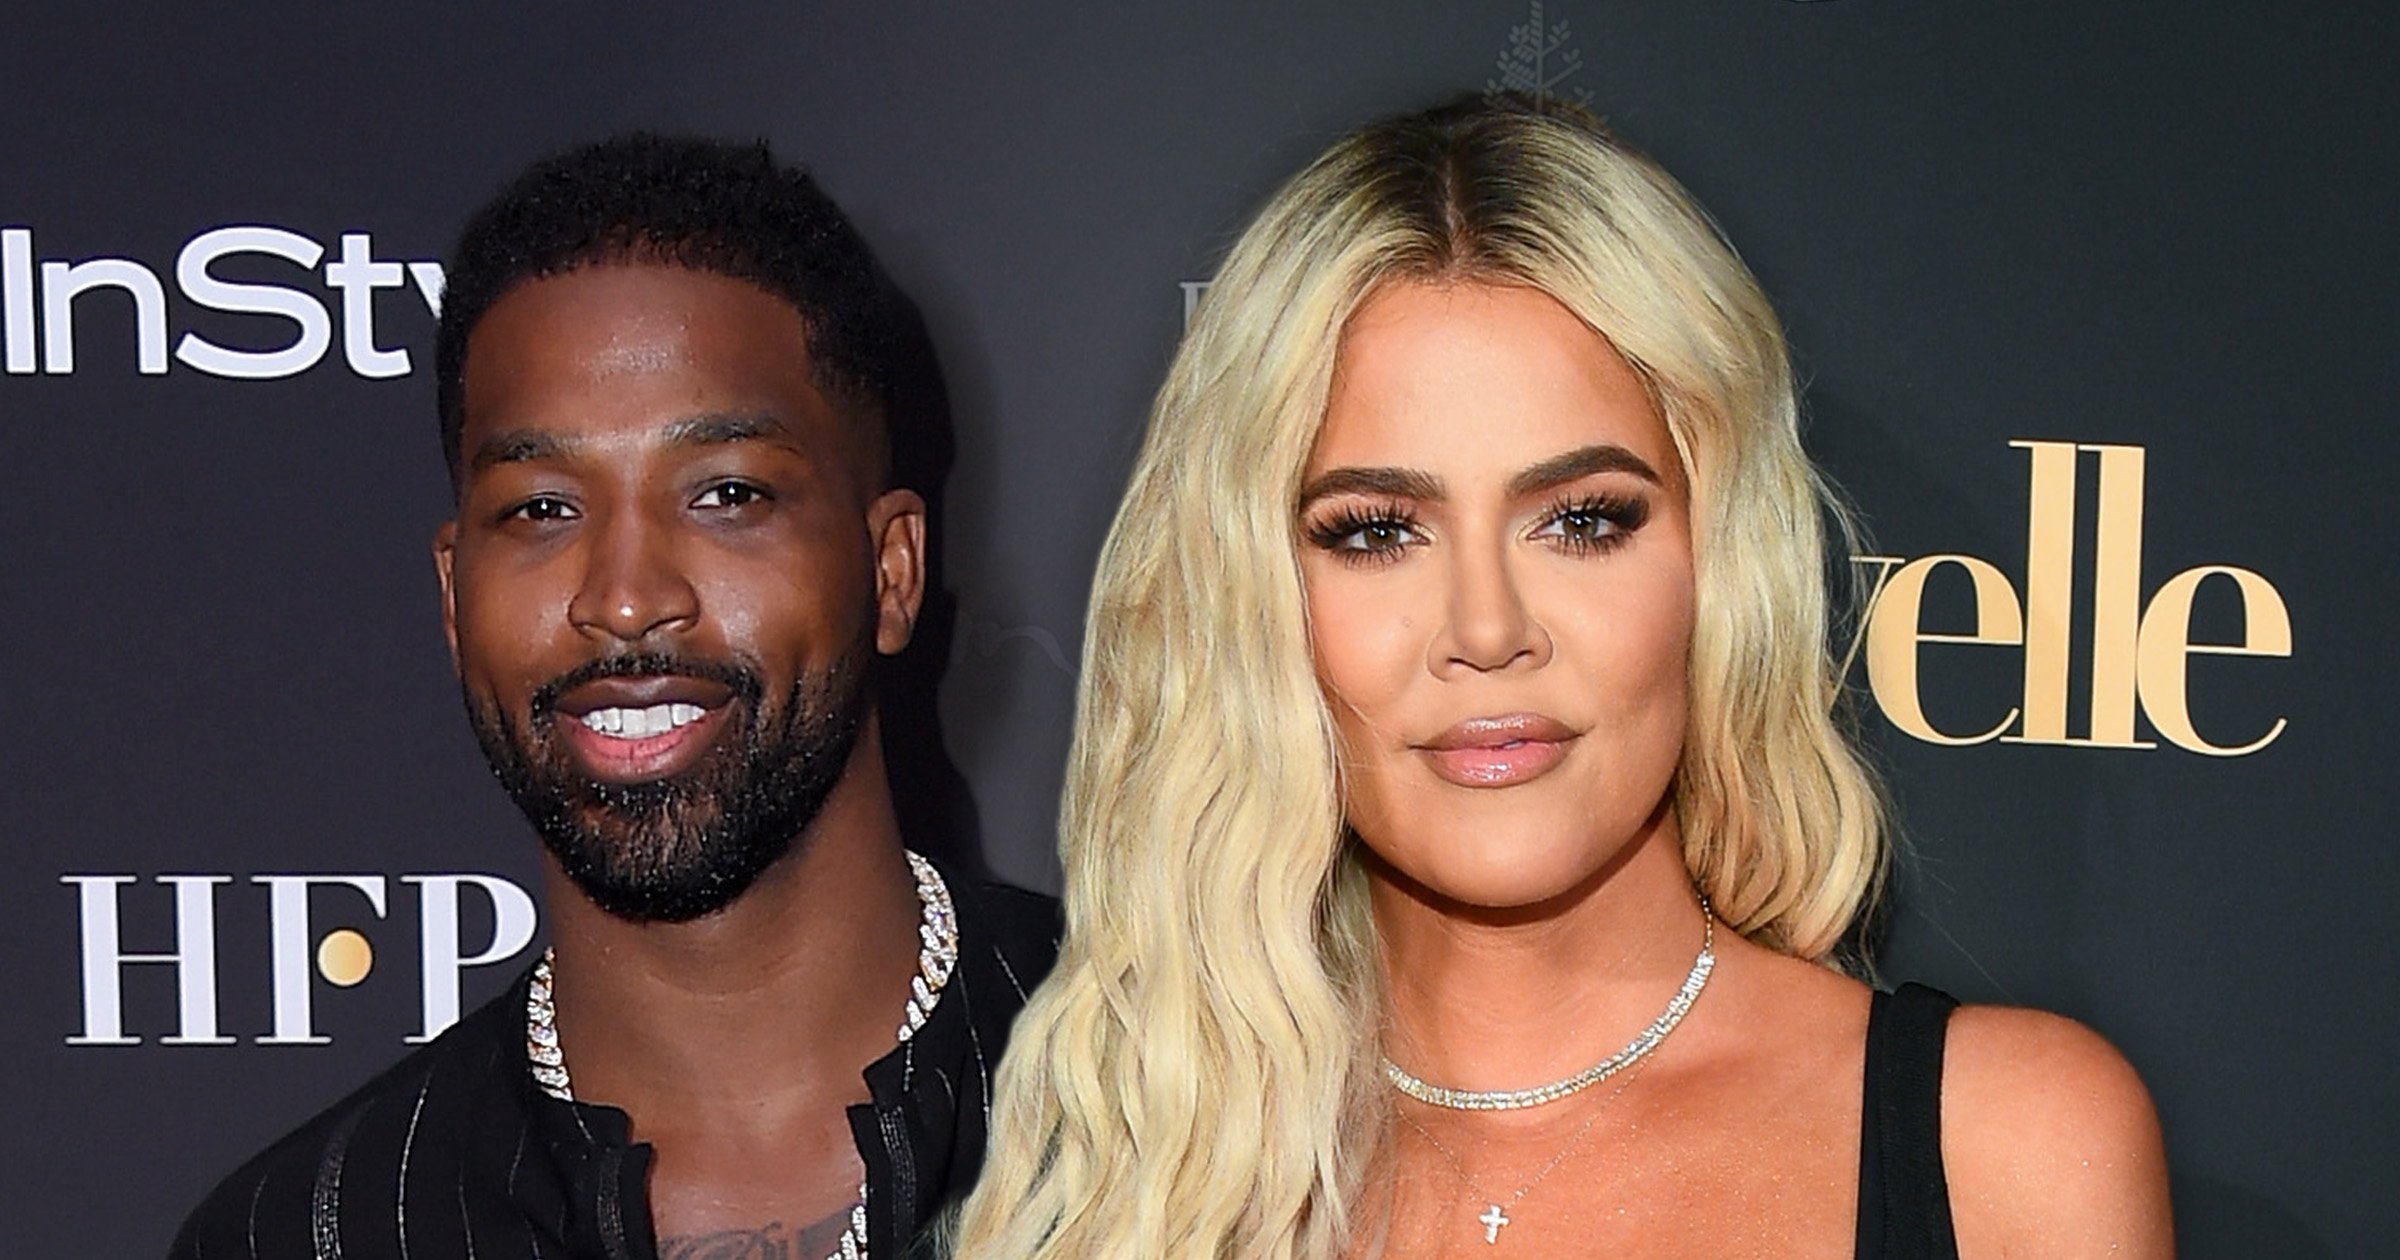 Khloe Kardashian And Tristan Thompson ‘were Secretly Engaged For Nine Months Before He Fathered